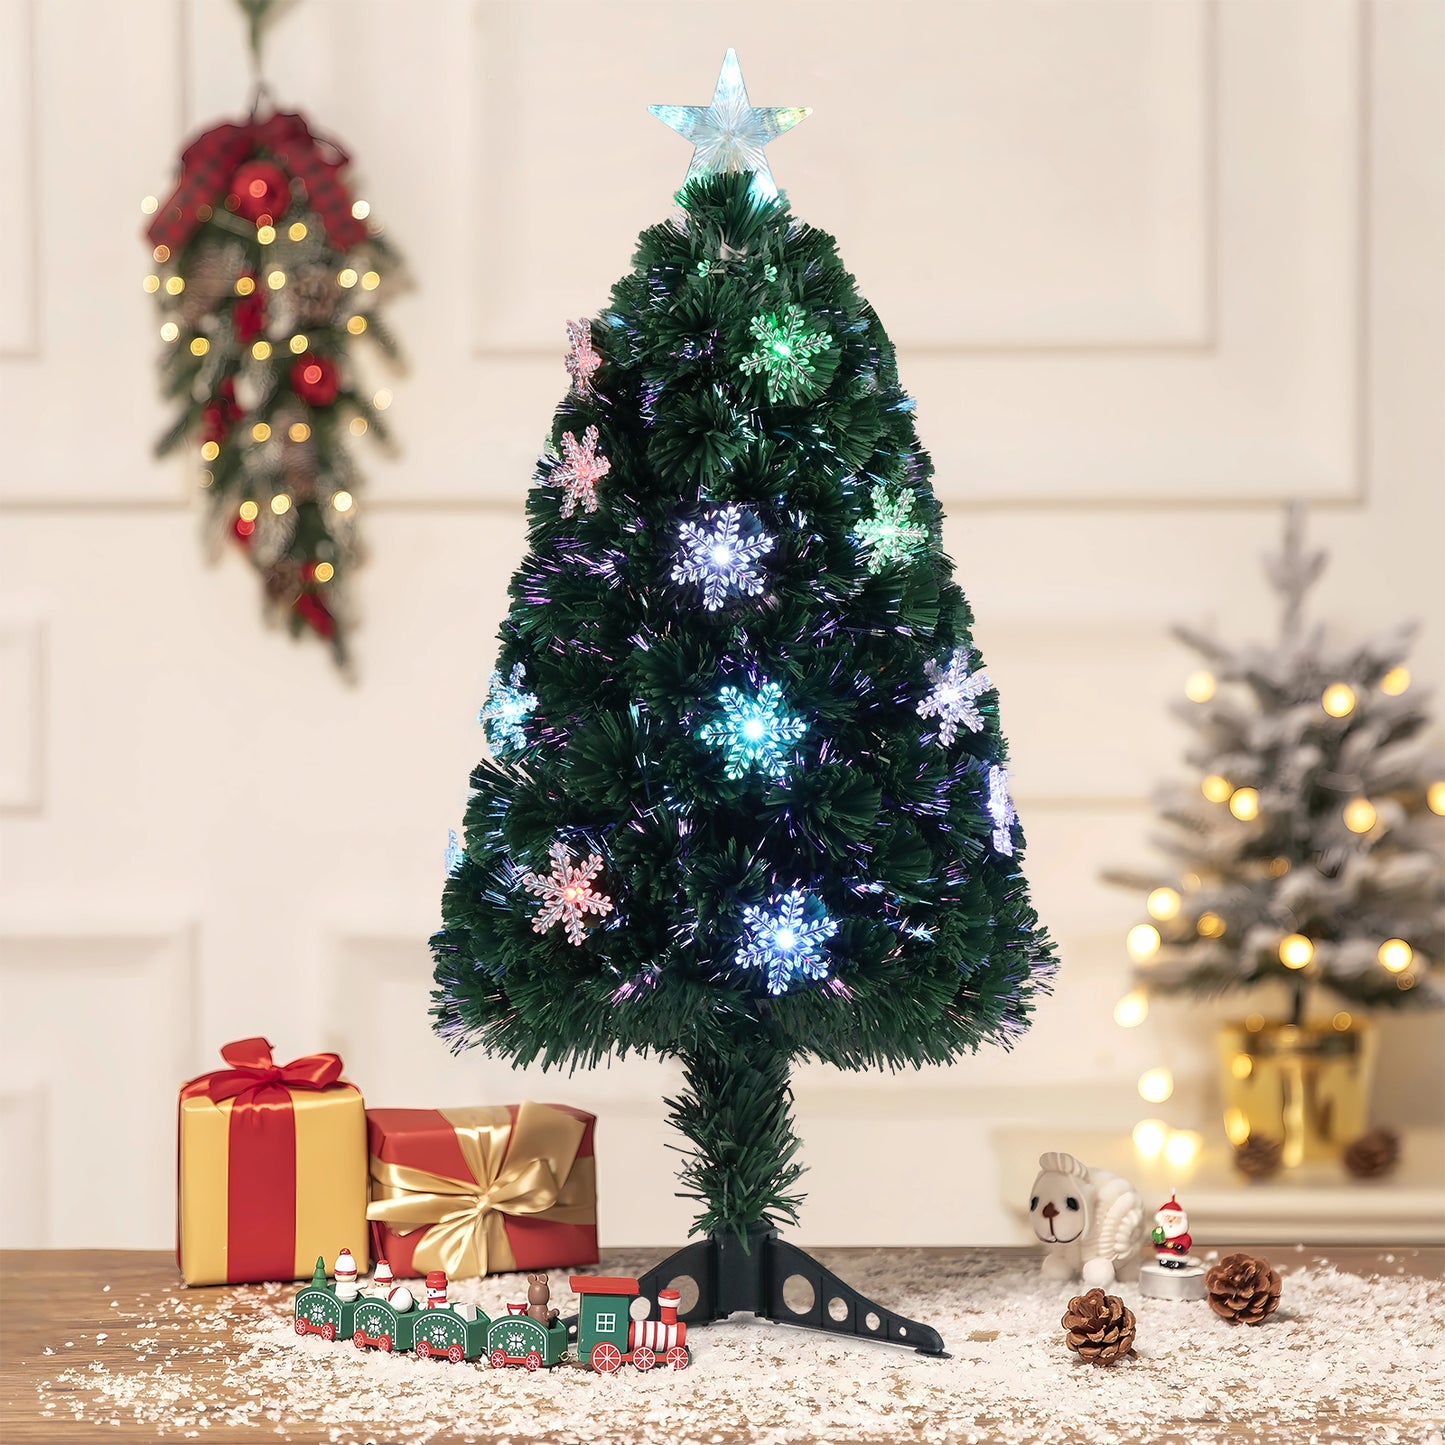 3ft Top With Stars,  12 Lights With Snow Flakes, Colorful And Color-Changing, 85 Branches, Christmas Tree